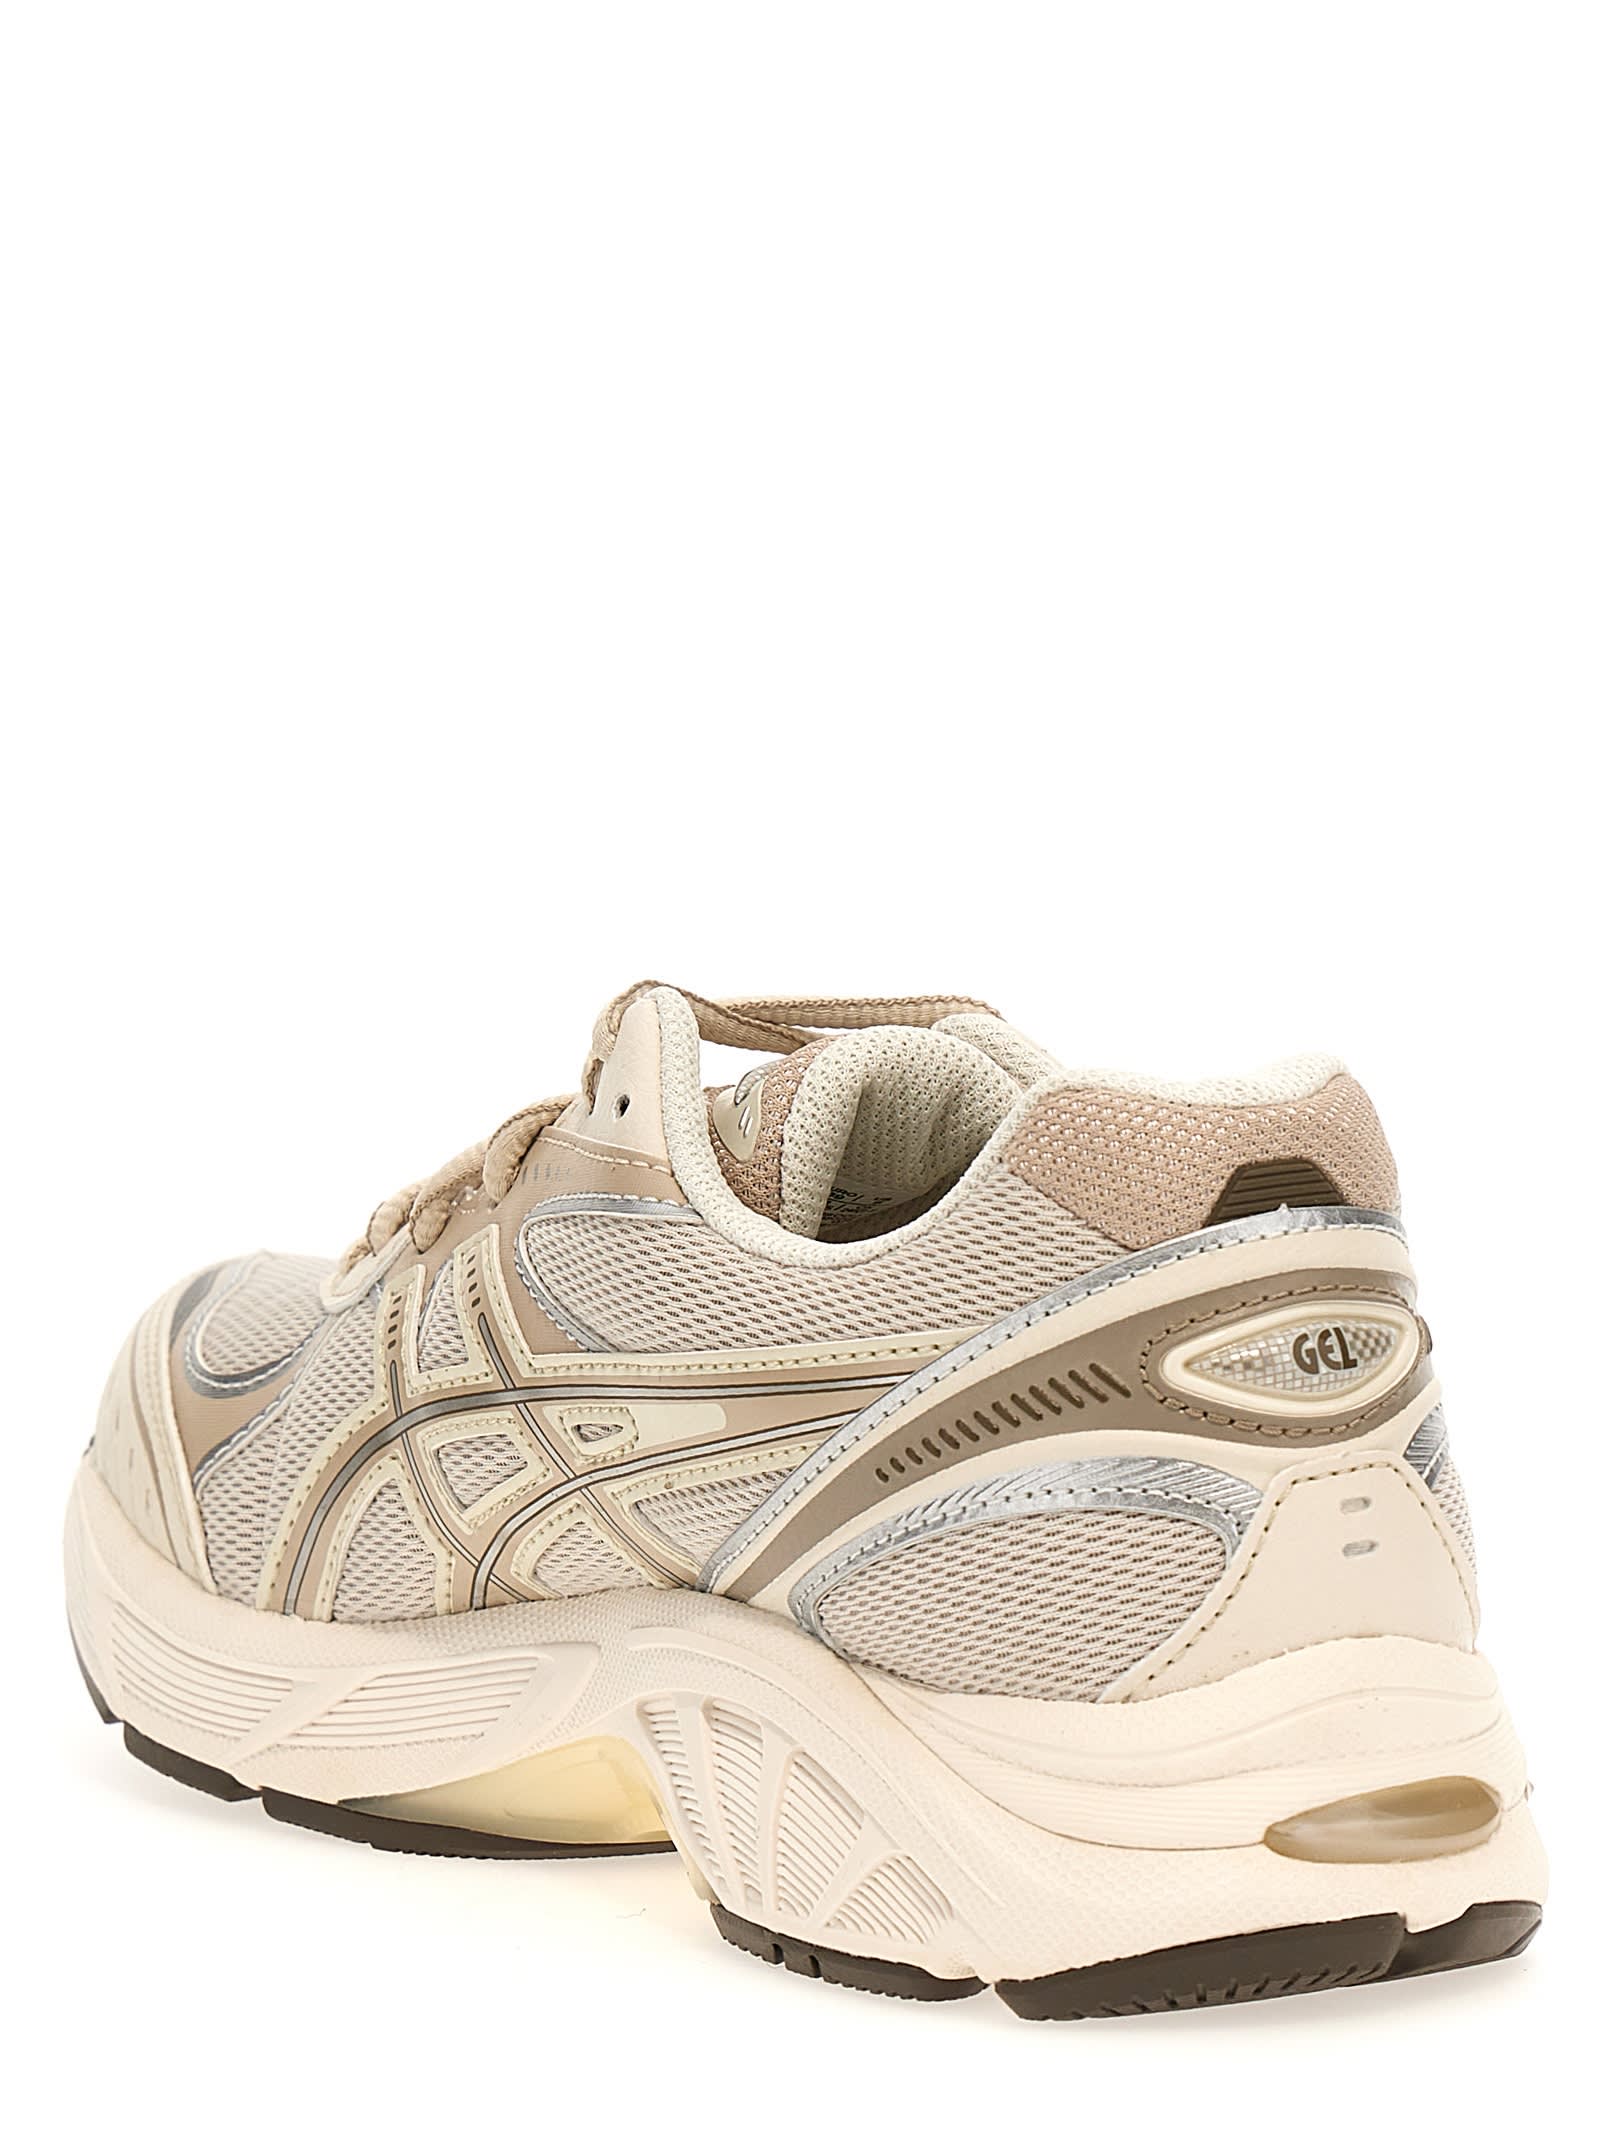 Shop Asics Gt-2160 Sneakers In Oatmeal/simply Taupe